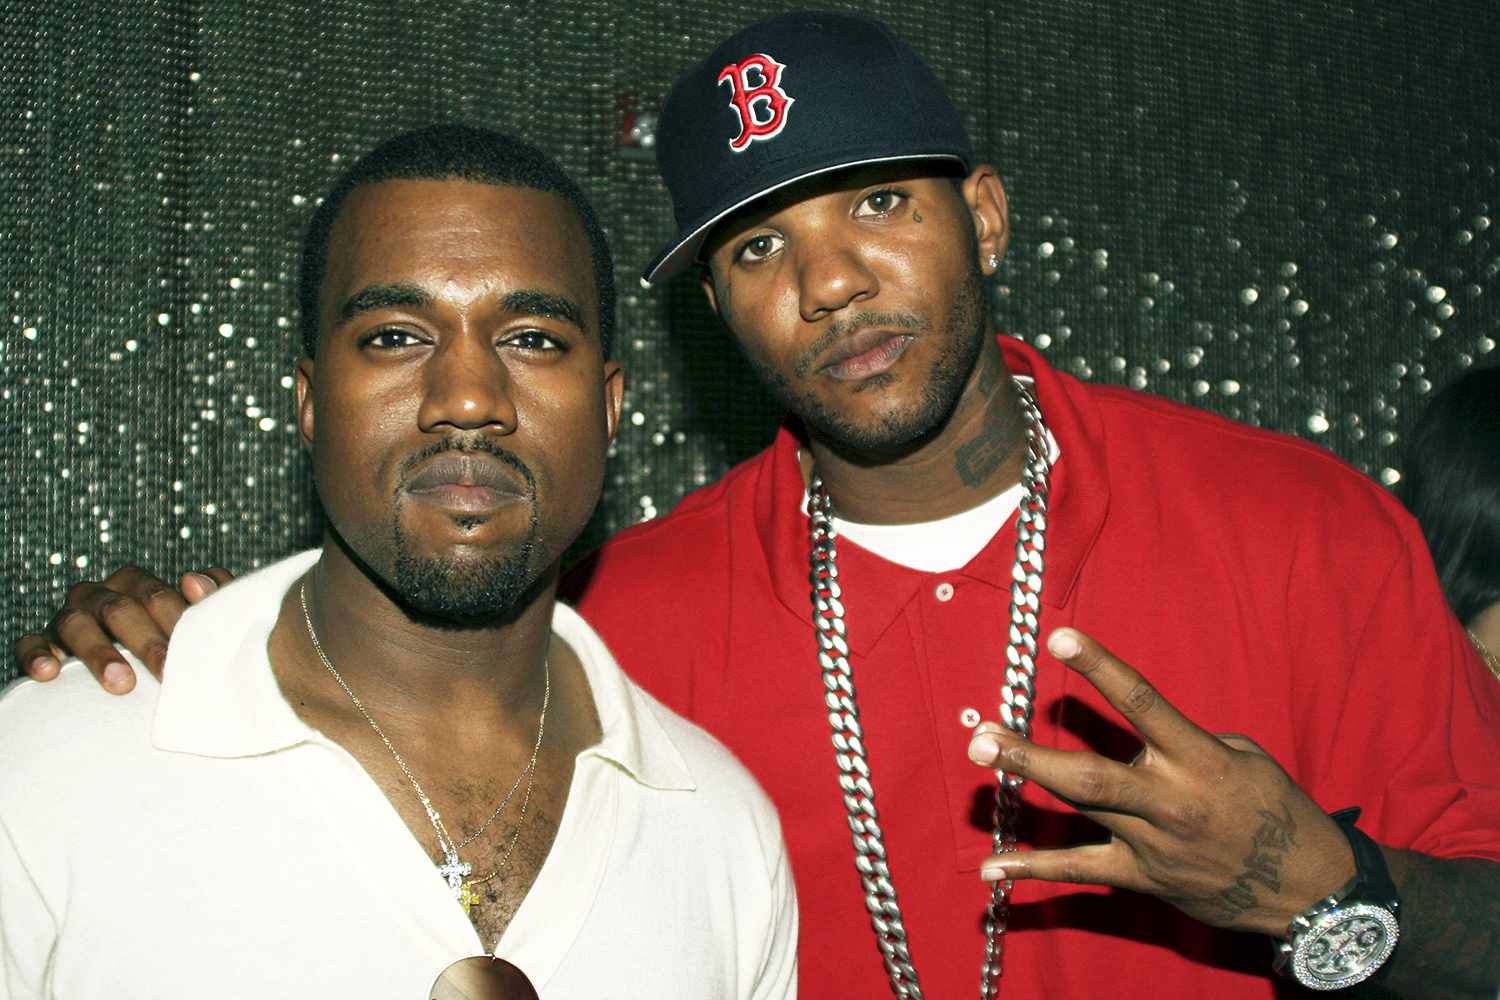 The Game Suggests Kanye West’s Ban Performing at 2022 Grammys ‘Could Be’ Because Trevor Noah is Hosting Awards Show